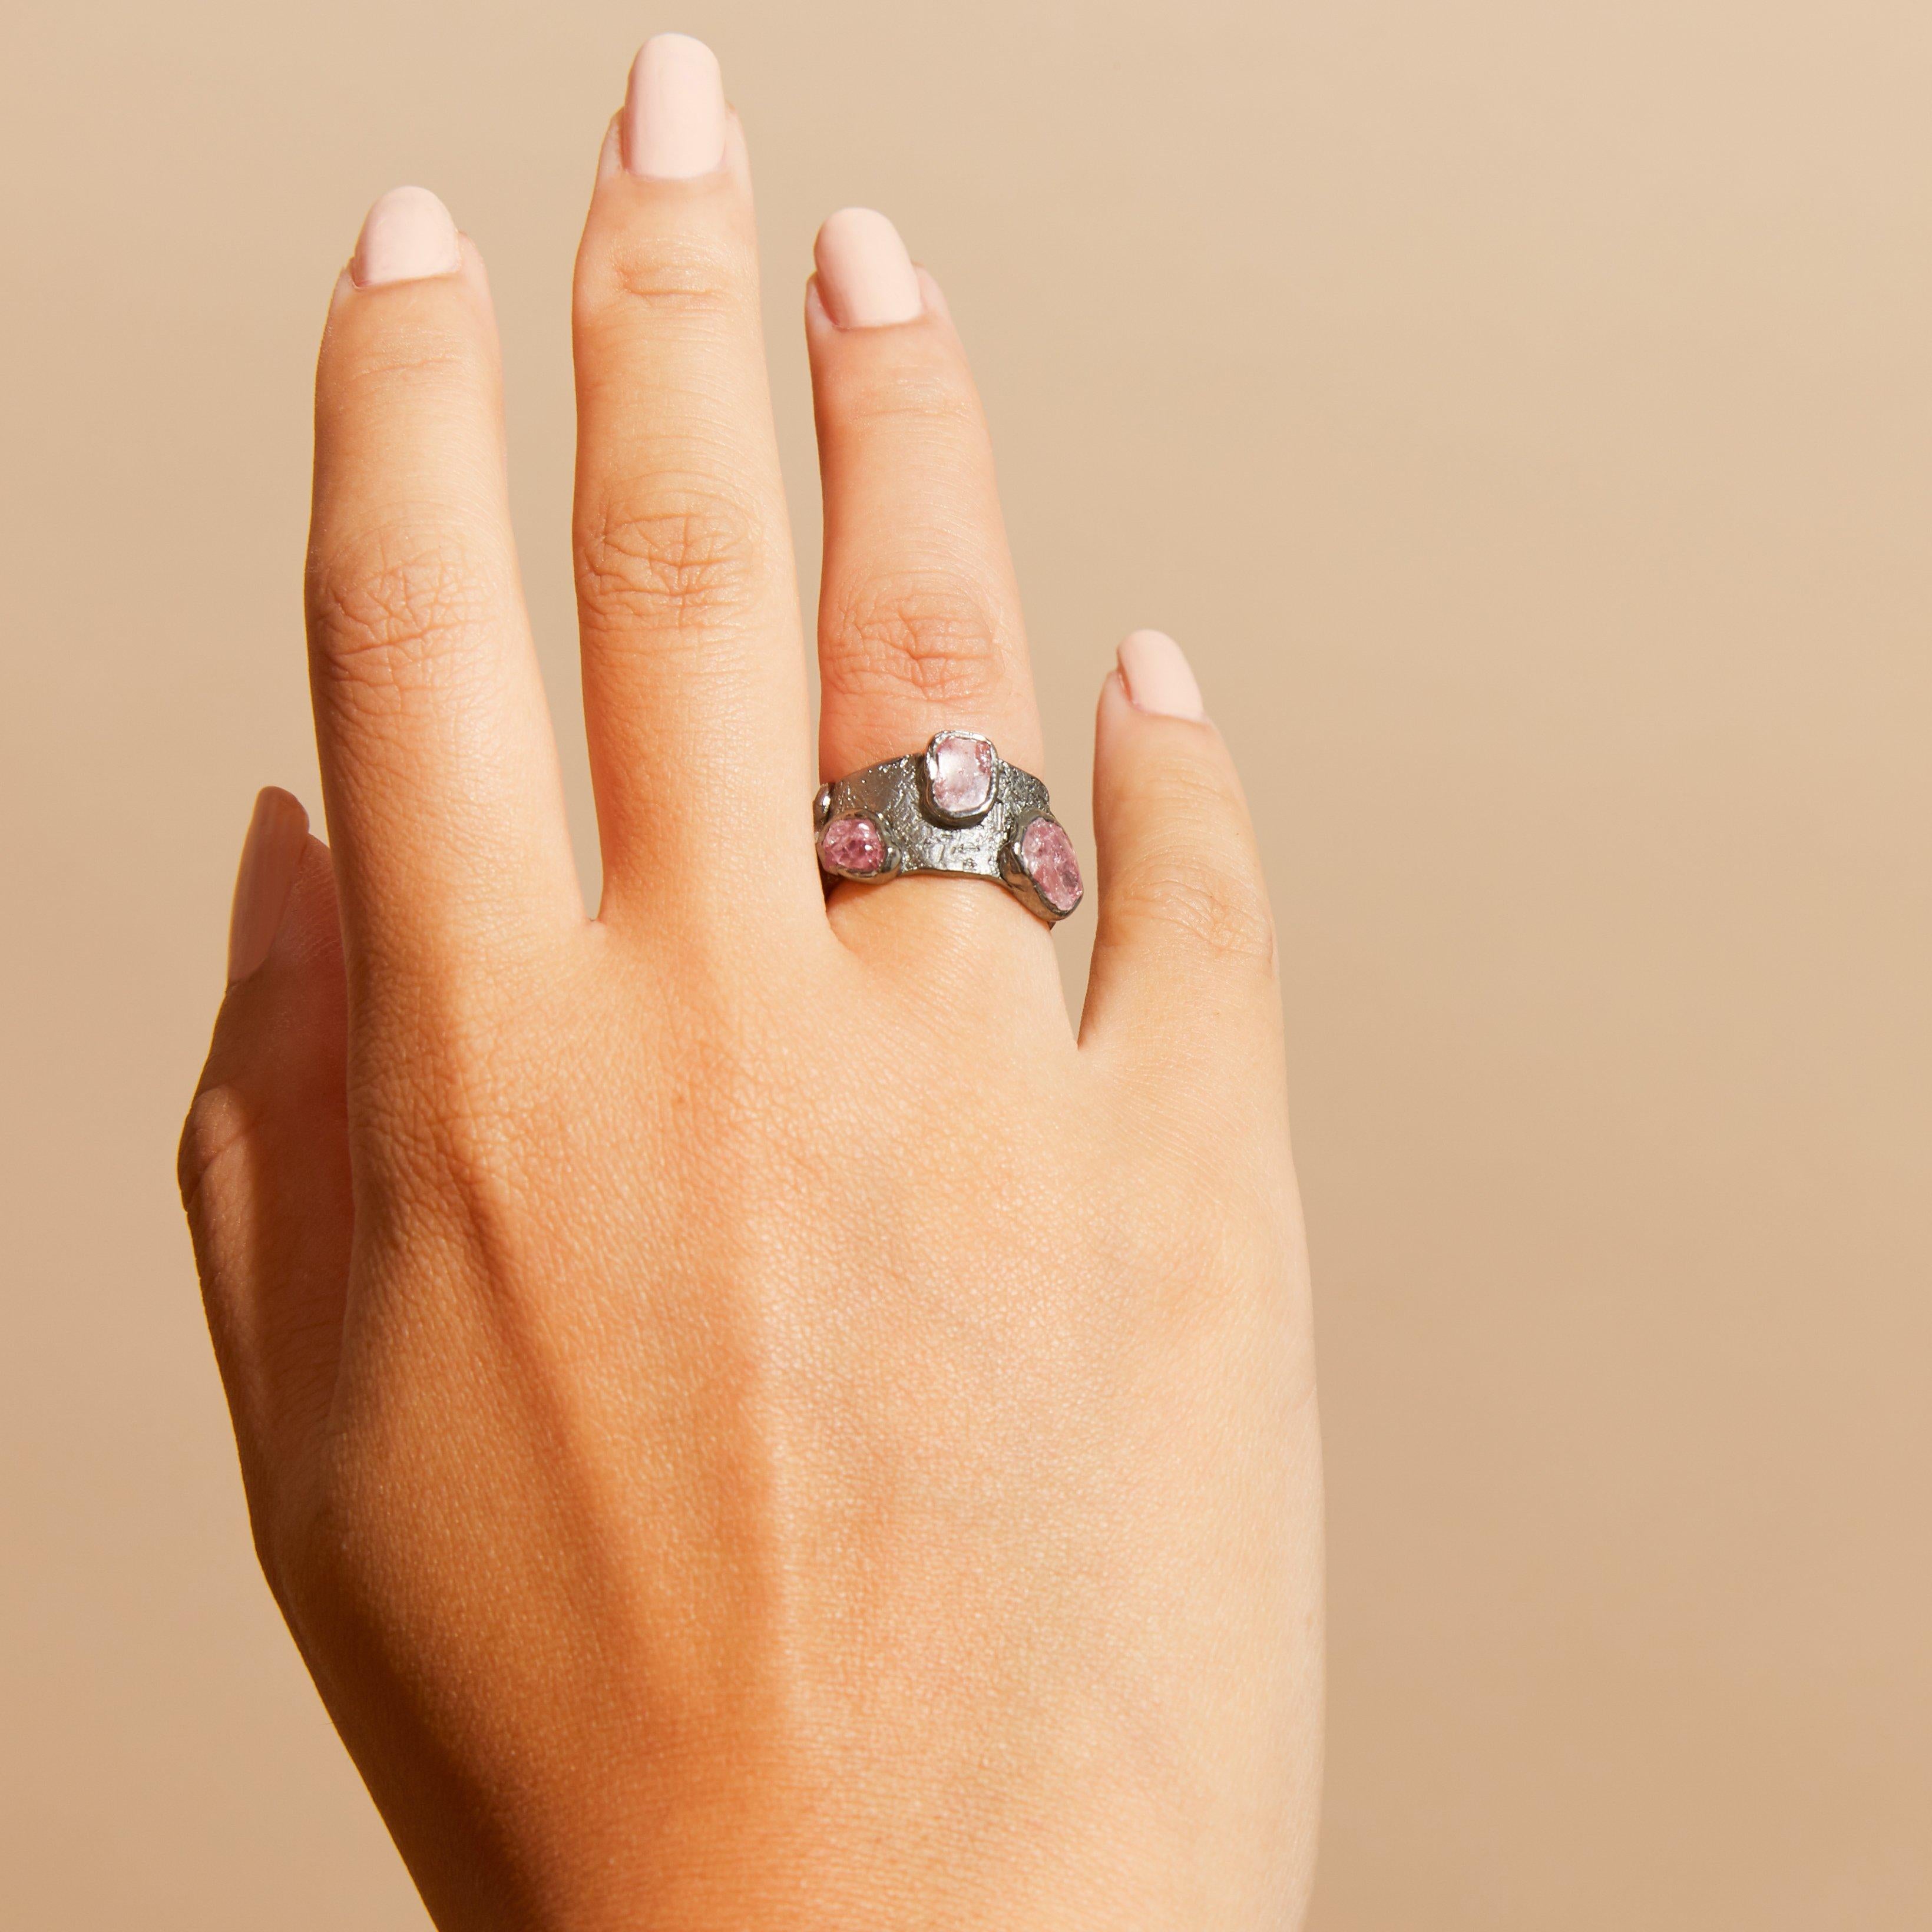 Radiant color glimmers from the depth of the unique gemstone that crowns this ring. A slim band of black anthracite creates the sinuous and curving band and trims of gold grace the edges of the jewel.
